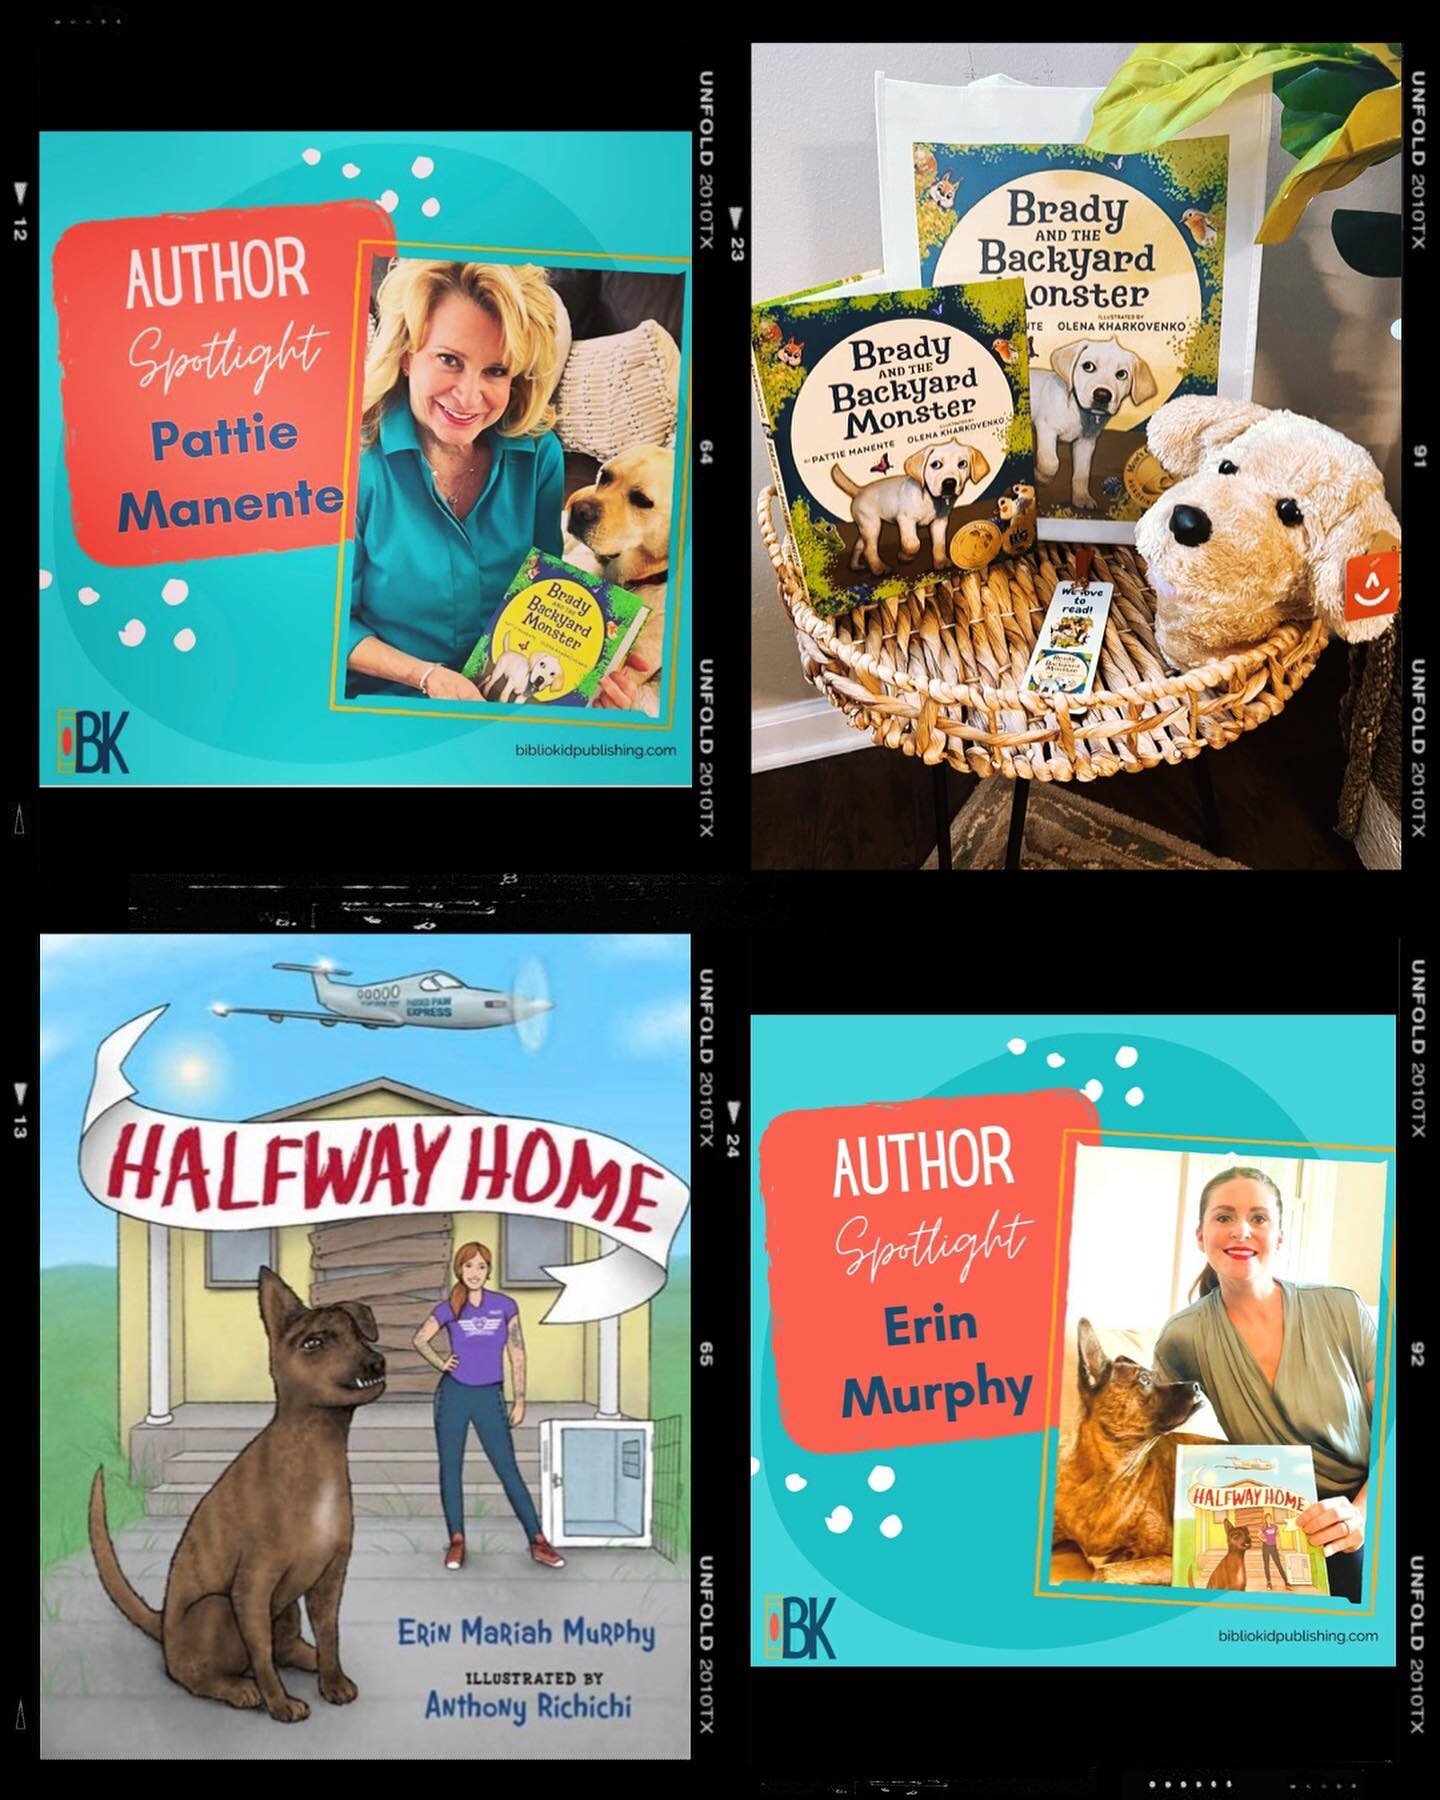 🐶 🐶 Two Book Giveaways!!

🐶 🐶 Animal enthusiasts, this book giveaway is for YOU!

🐶 🐶 My fellow @bibliokid_pub author and I double-dog dare ya&rsquo;ll to enter our Dec 5 book giveaway.

🐶 🐶 We are double downing and including our individual 